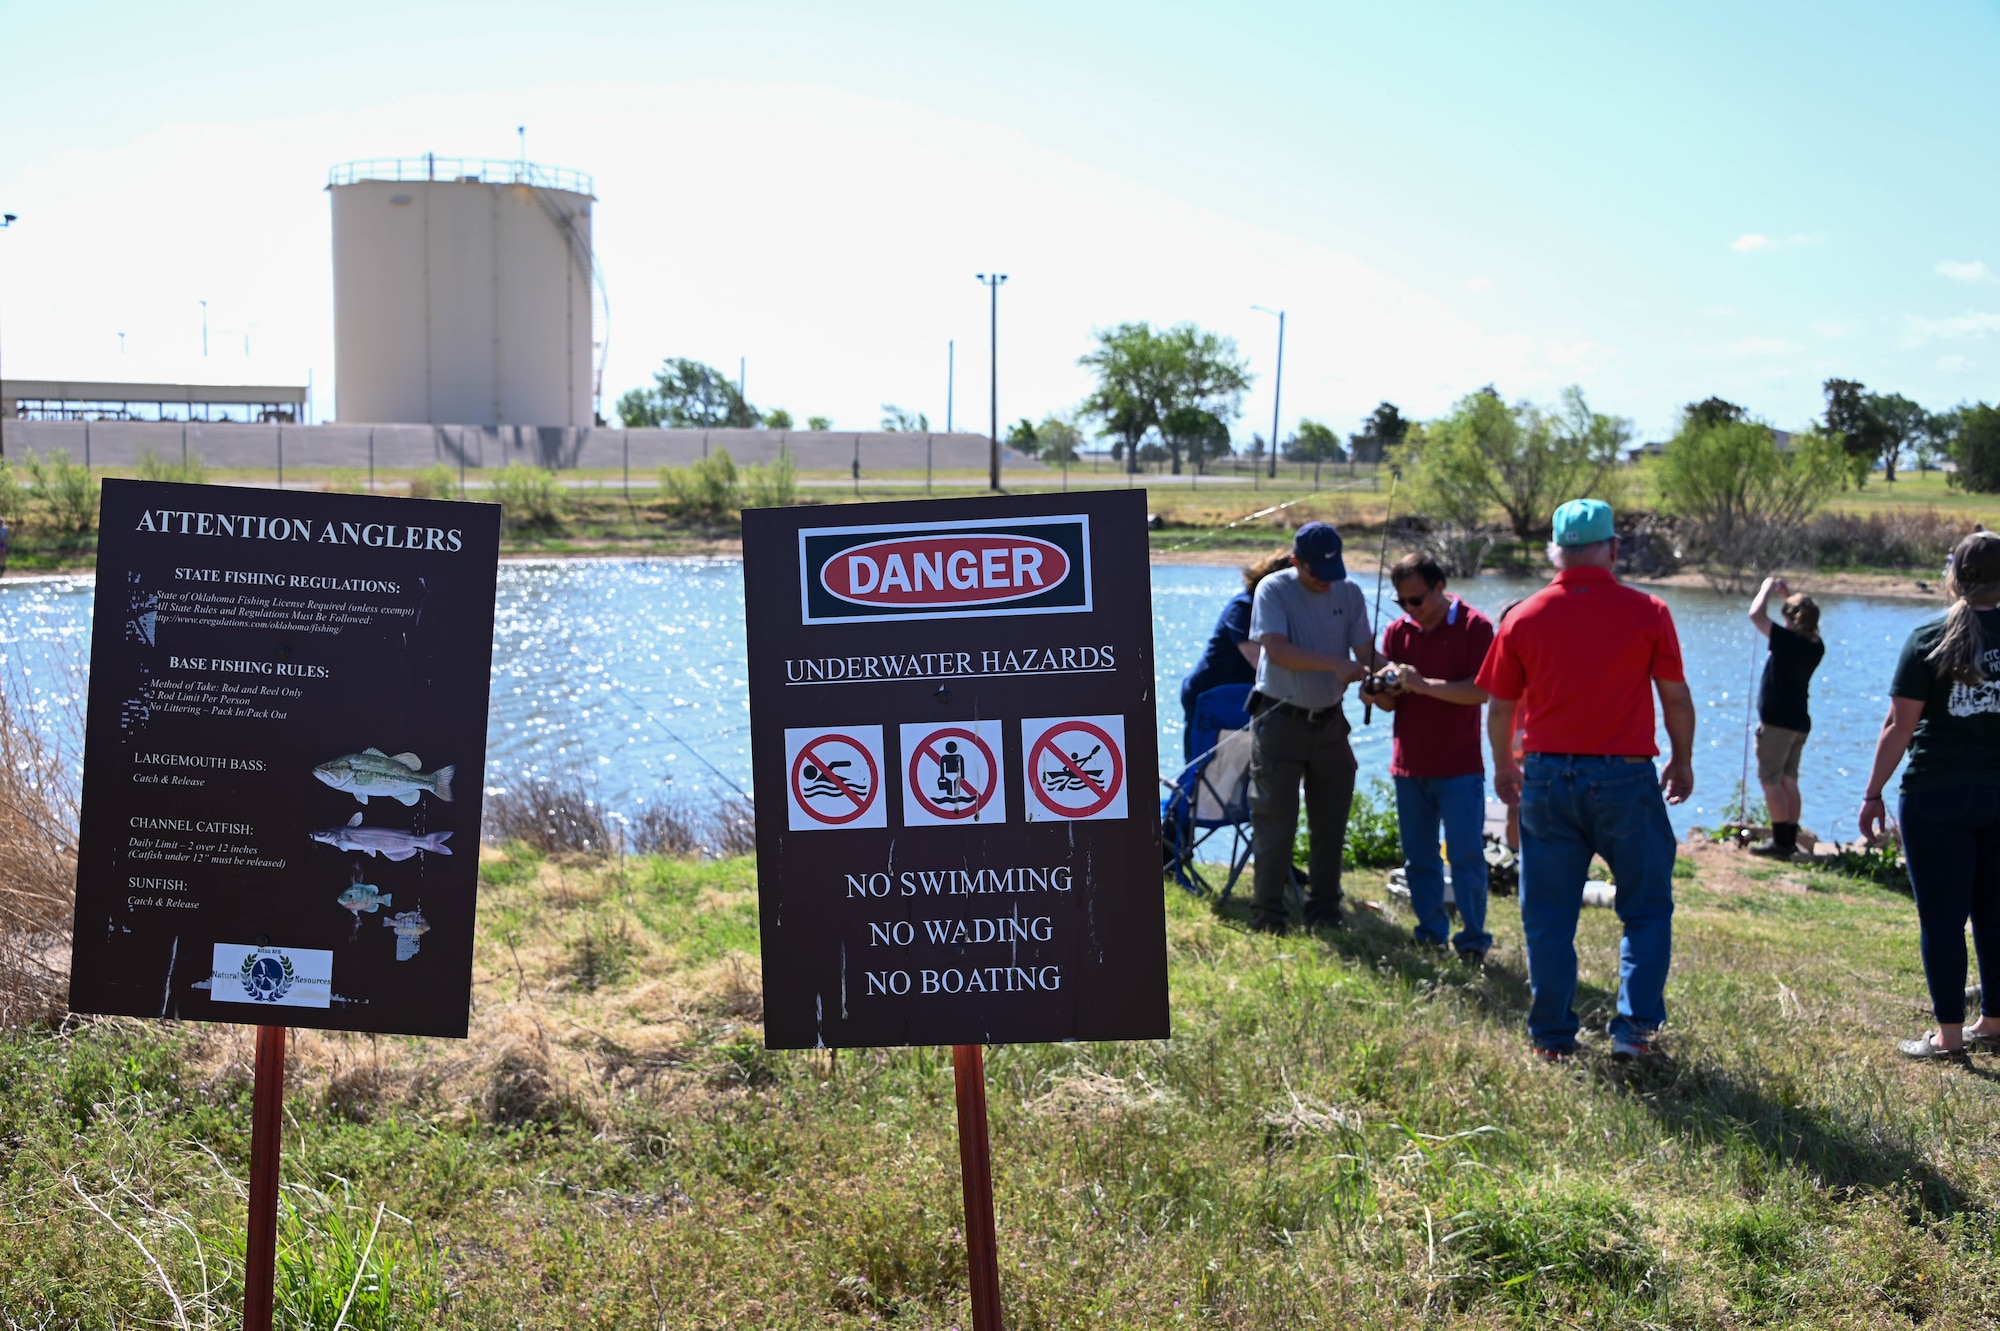 Signs provide information and warnings at the base pond at Altus Air Force Base, Oklahoma, April 29, 2022. The pond was stocked with 800 pounds of channel catfish for the annual fishing derby. (U.S. Air Force photo by Senior Airman Kayla Christenson)